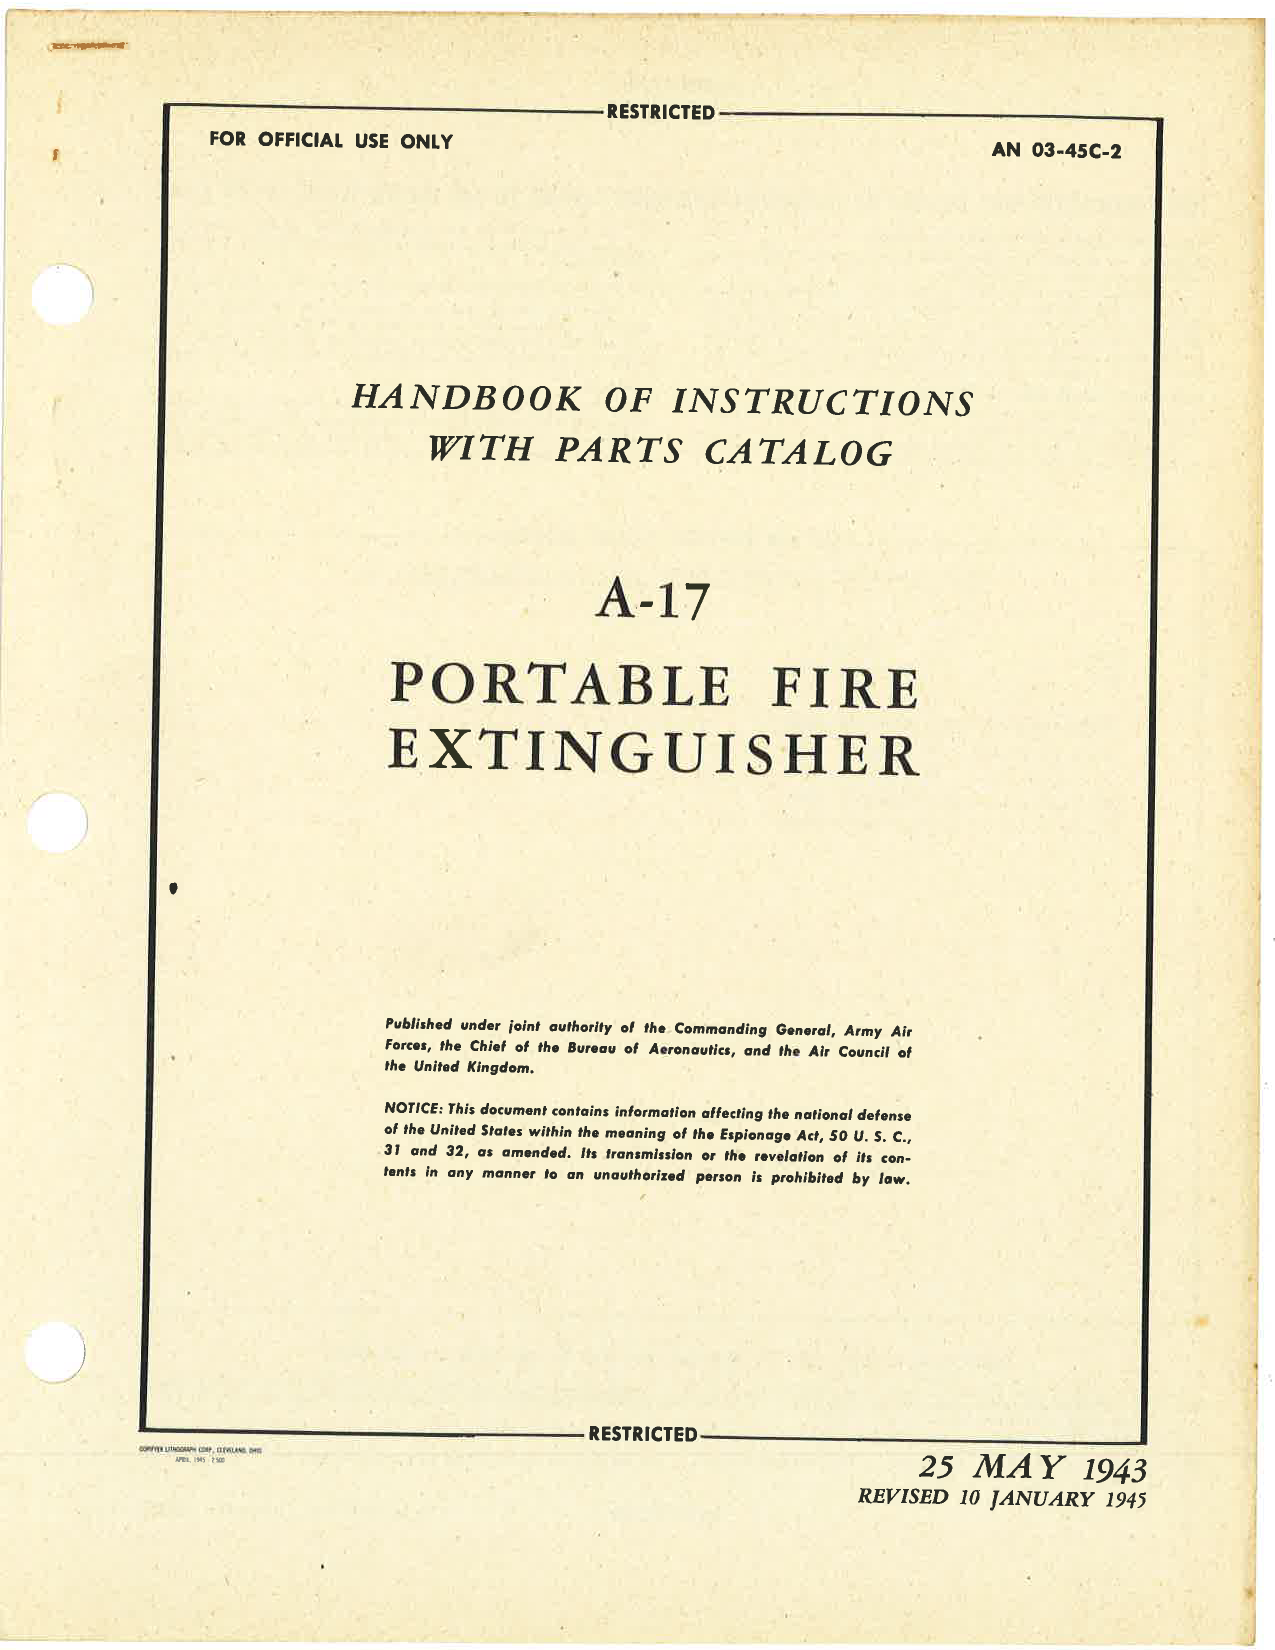 Sample page 1 from AirCorps Library document: Handbook of Instructions with Parts Catalog for A-17 Portable Fire Extinguisher